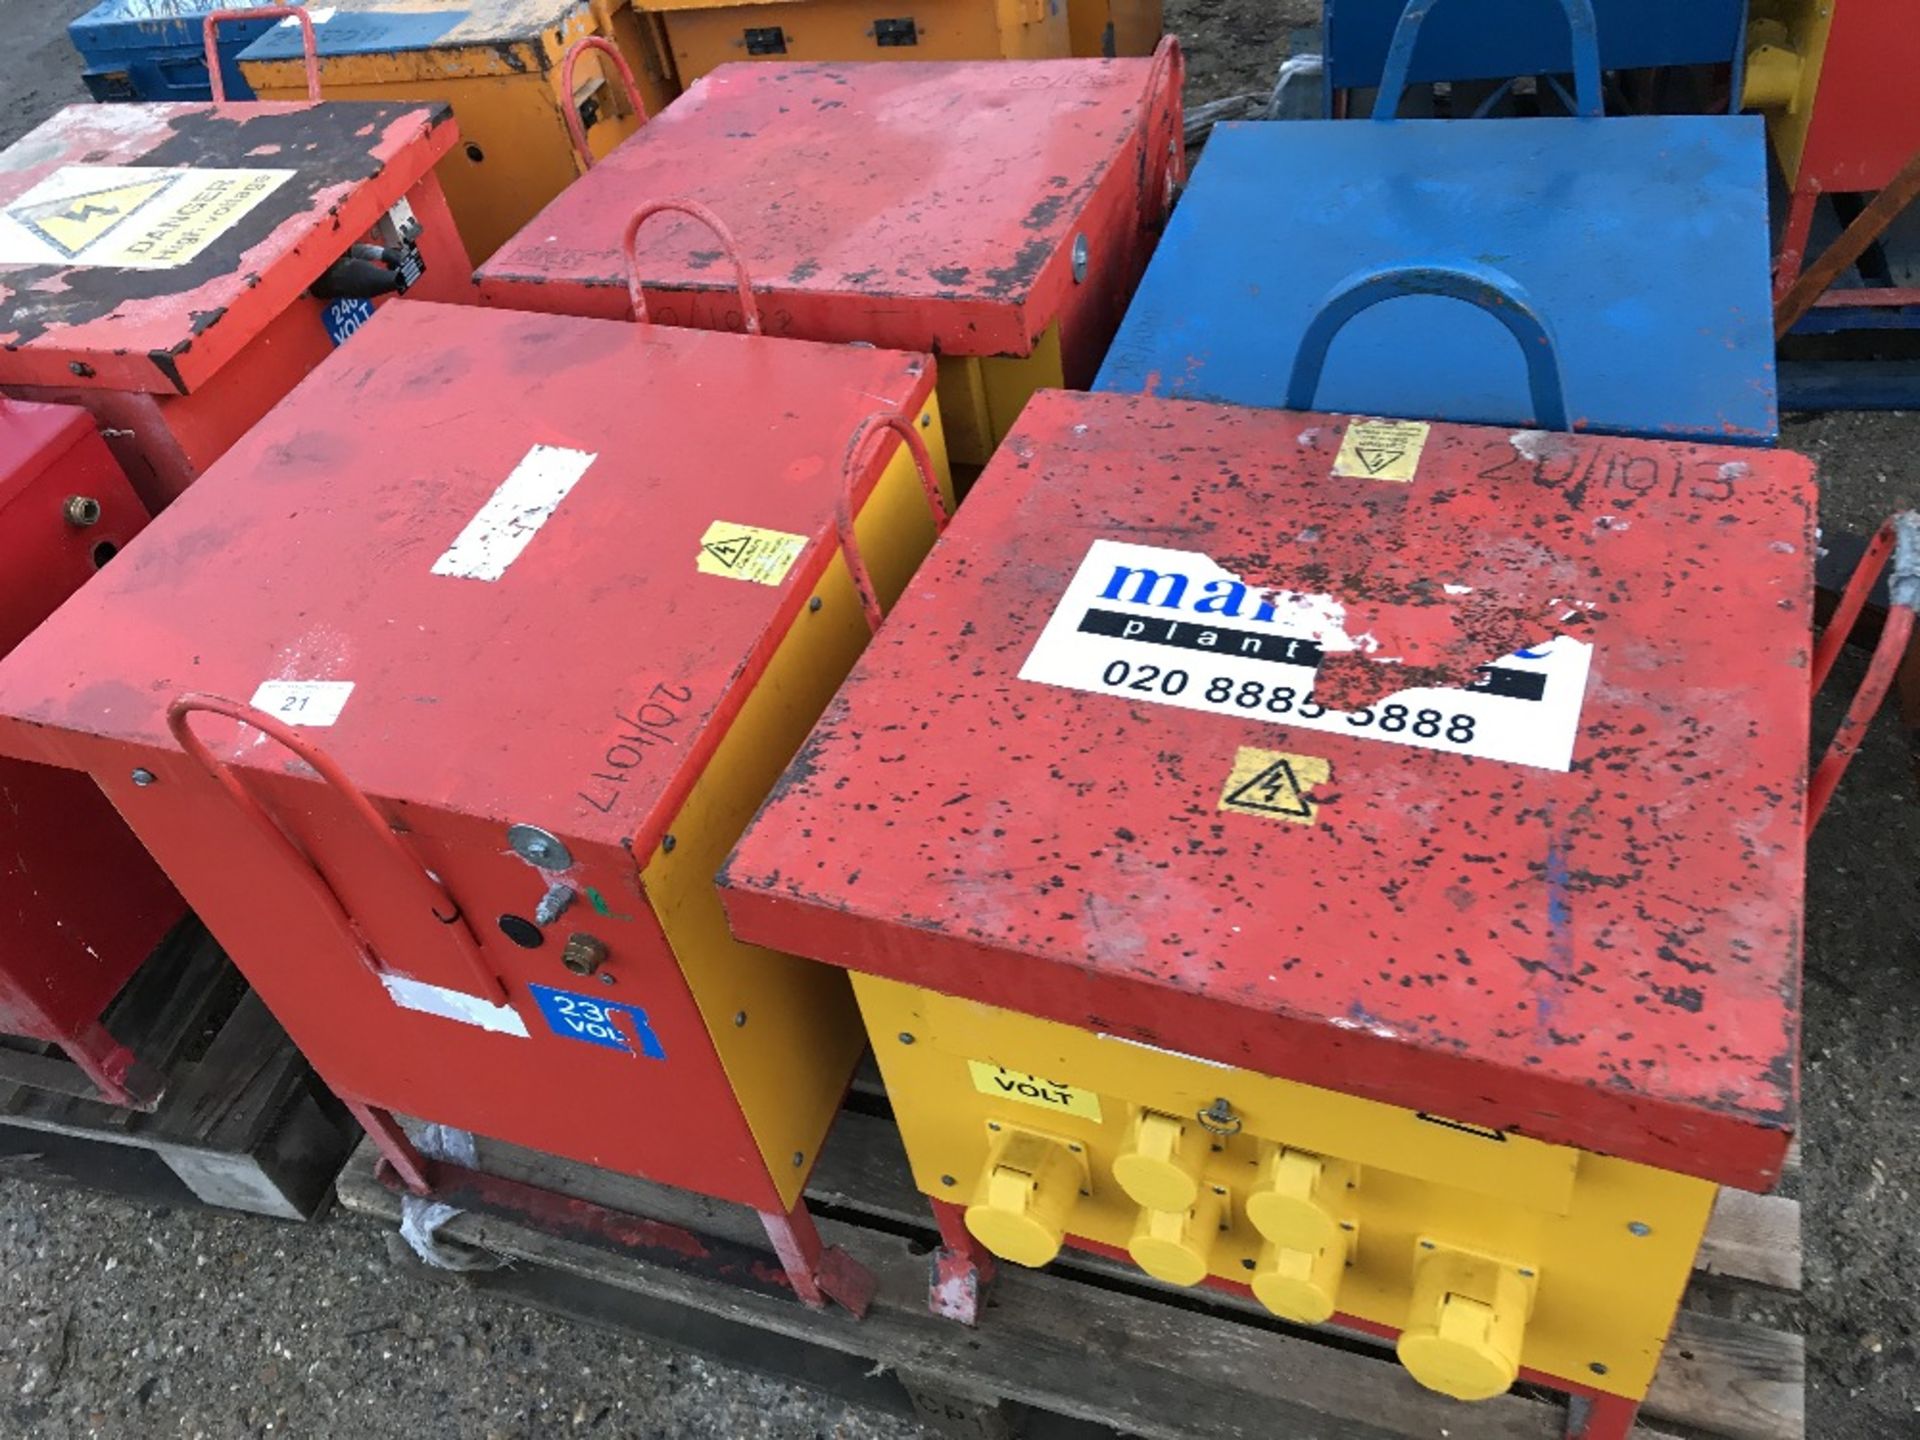 PALLET OF 4 X SITE TRANSFORMERS, UNTESTED